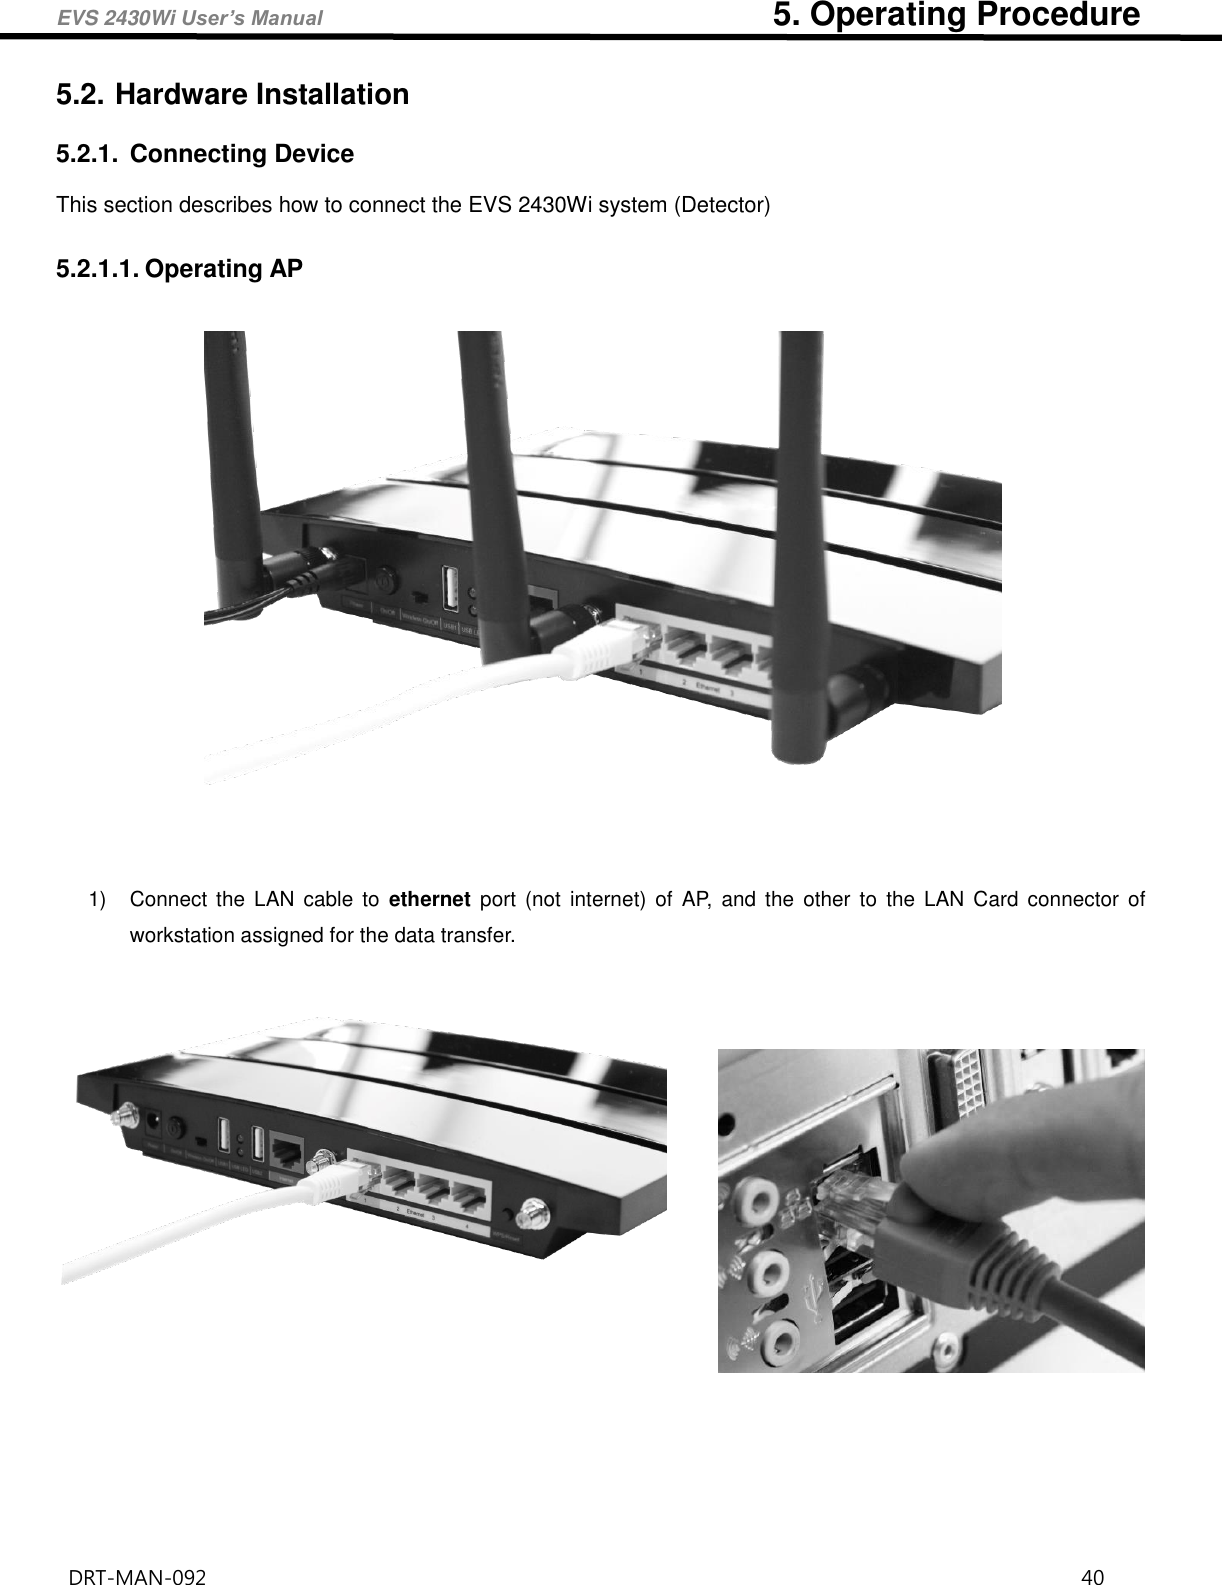 EVS 2430Wi User’s Manual                                                      5. Operating Procedure DRT-MAN-092                                                                                    40   5.2. Hardware Installation 5.2.1.  Connecting Device This section describes how to connect the EVS 2430Wi system (Detector)    5.2.1.1. Operating AP    1)  Connect  the  LAN cable  to  ethernet  port  (not  internet)  of  AP,  and the  other  to  the  LAN  Card  connector  of workstation assigned for the data transfer.                